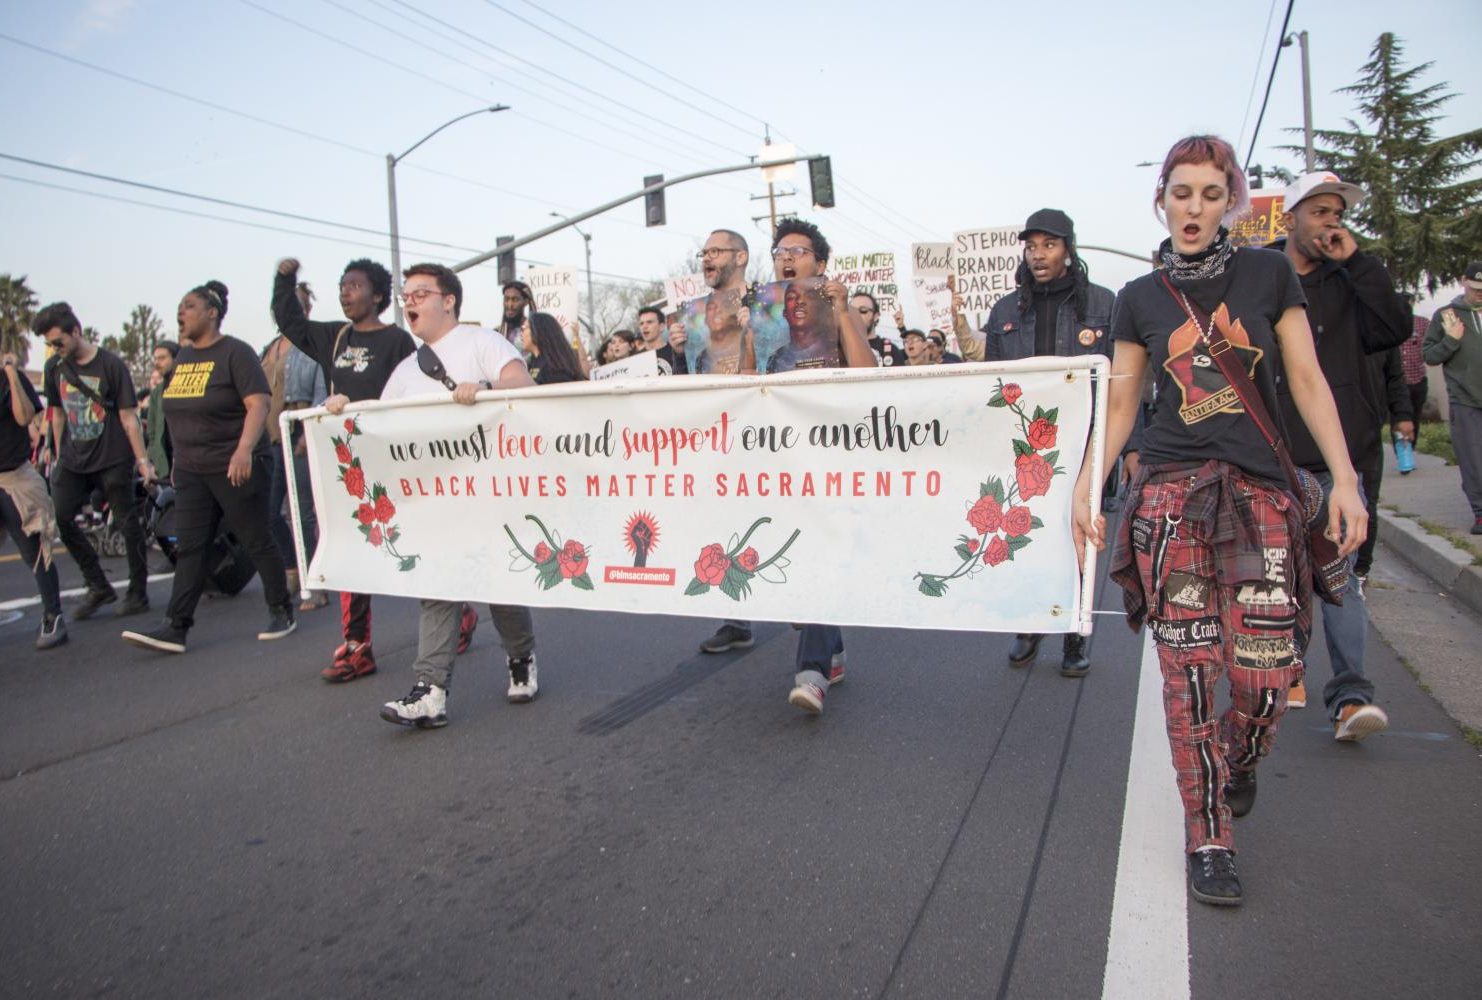 Demonstrators hold up a sign that reads “We must love and support one another / Black Lives Matter Sacramento” banner during the one year anniversary of Stephon Clark’s death in South Sacramento, Calif. on March 18, 2019. (Photo by Ashley Hayes-Stone)